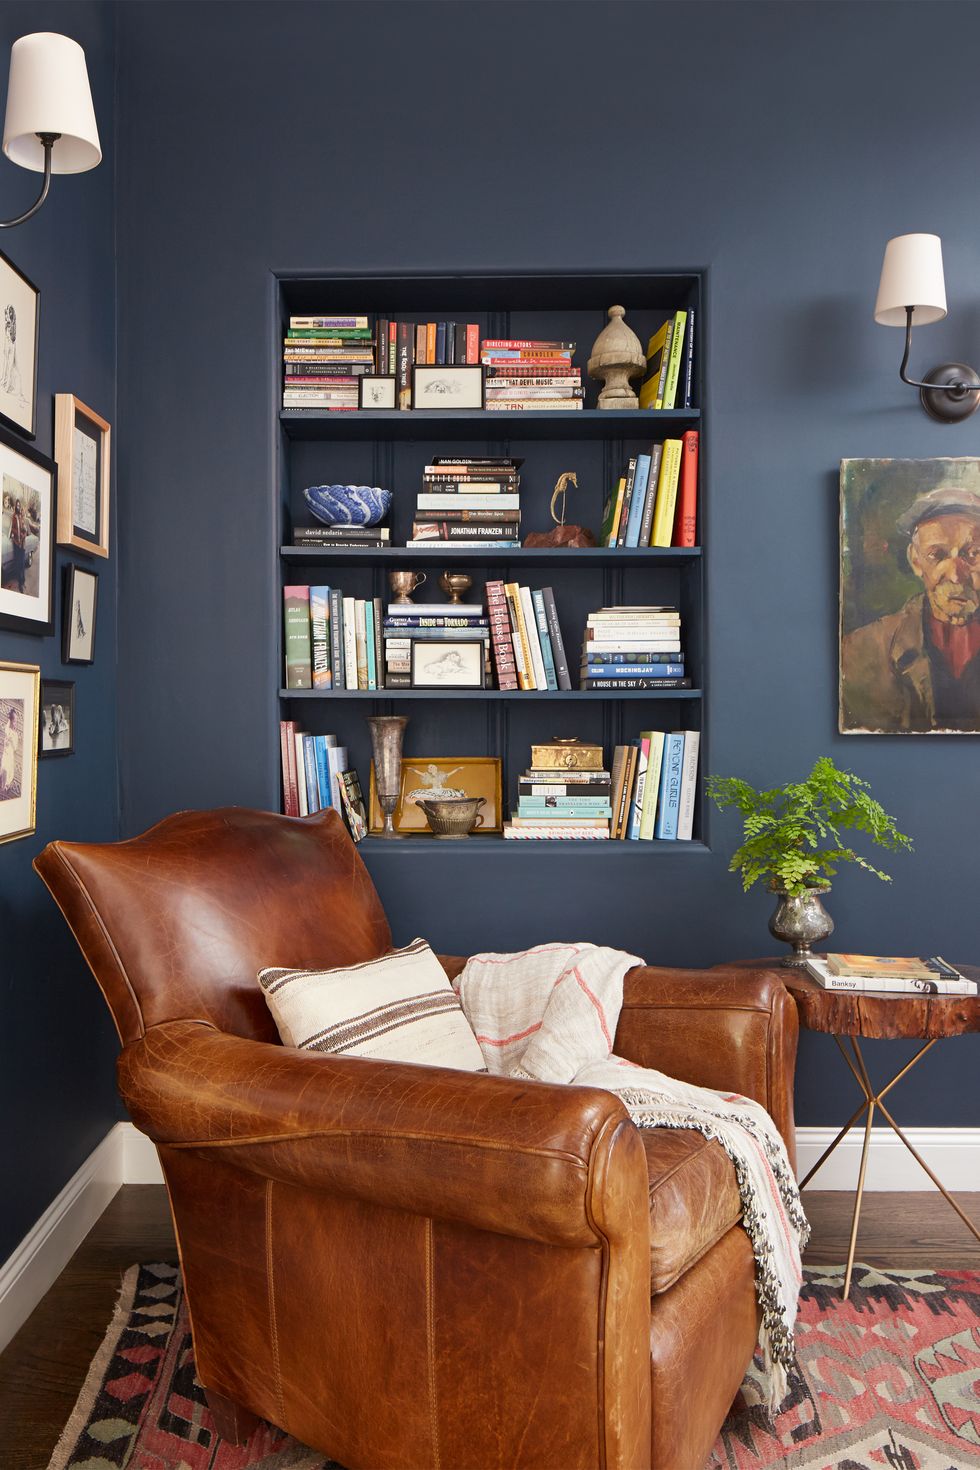 The Best Dark Blue Paint Colors For the Home - Building Bluebird